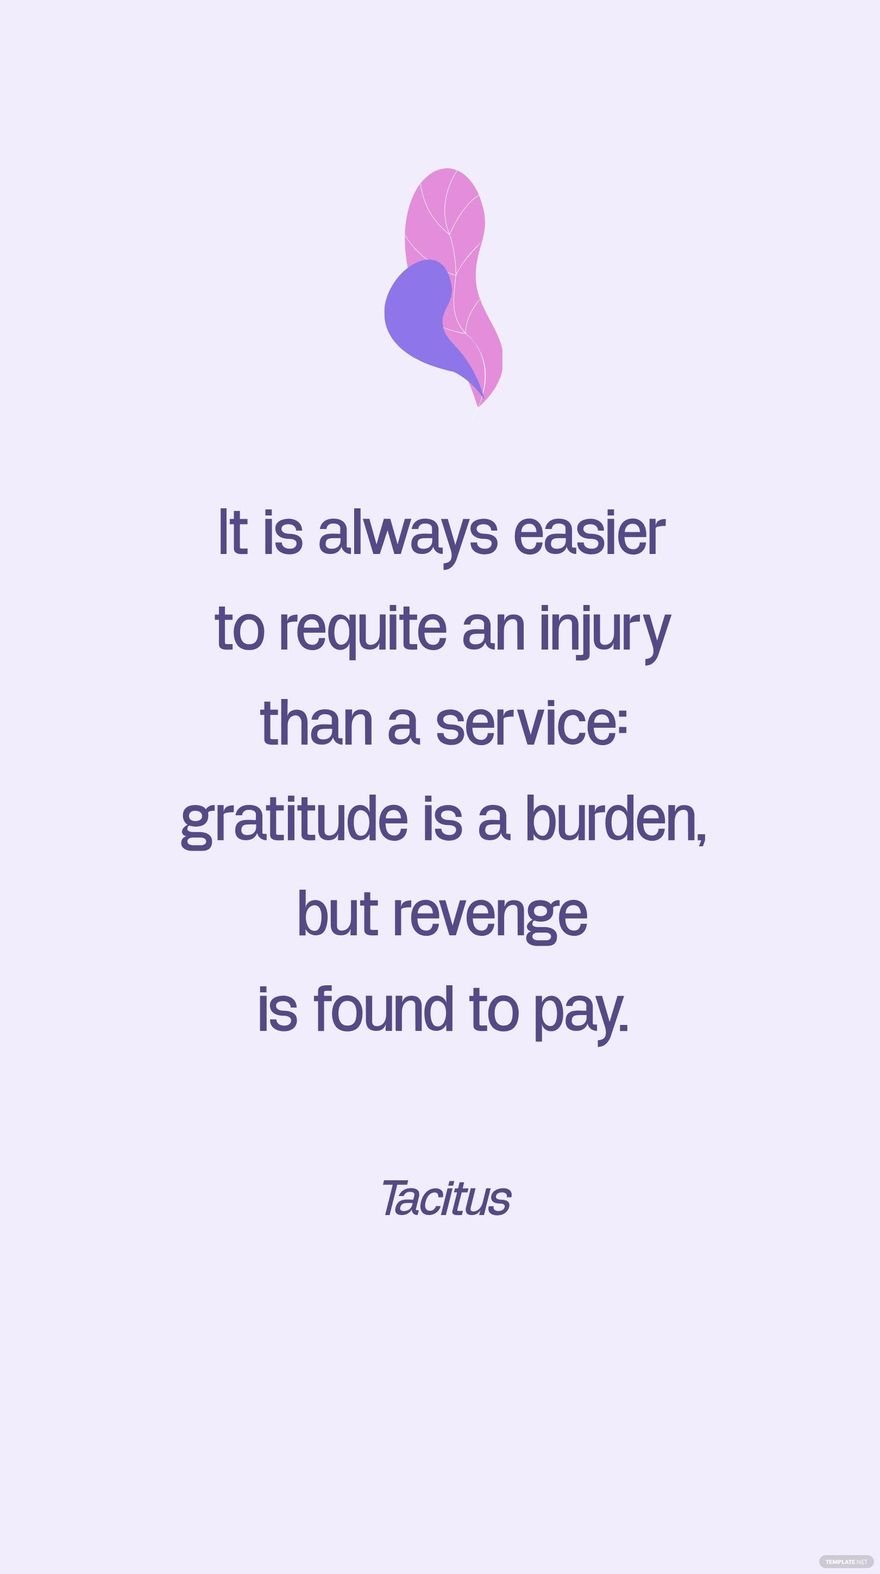 Tacitus - It is always easier to requite an injury than a service: gratitude is a burden, but revenge is found to pay. in JPG